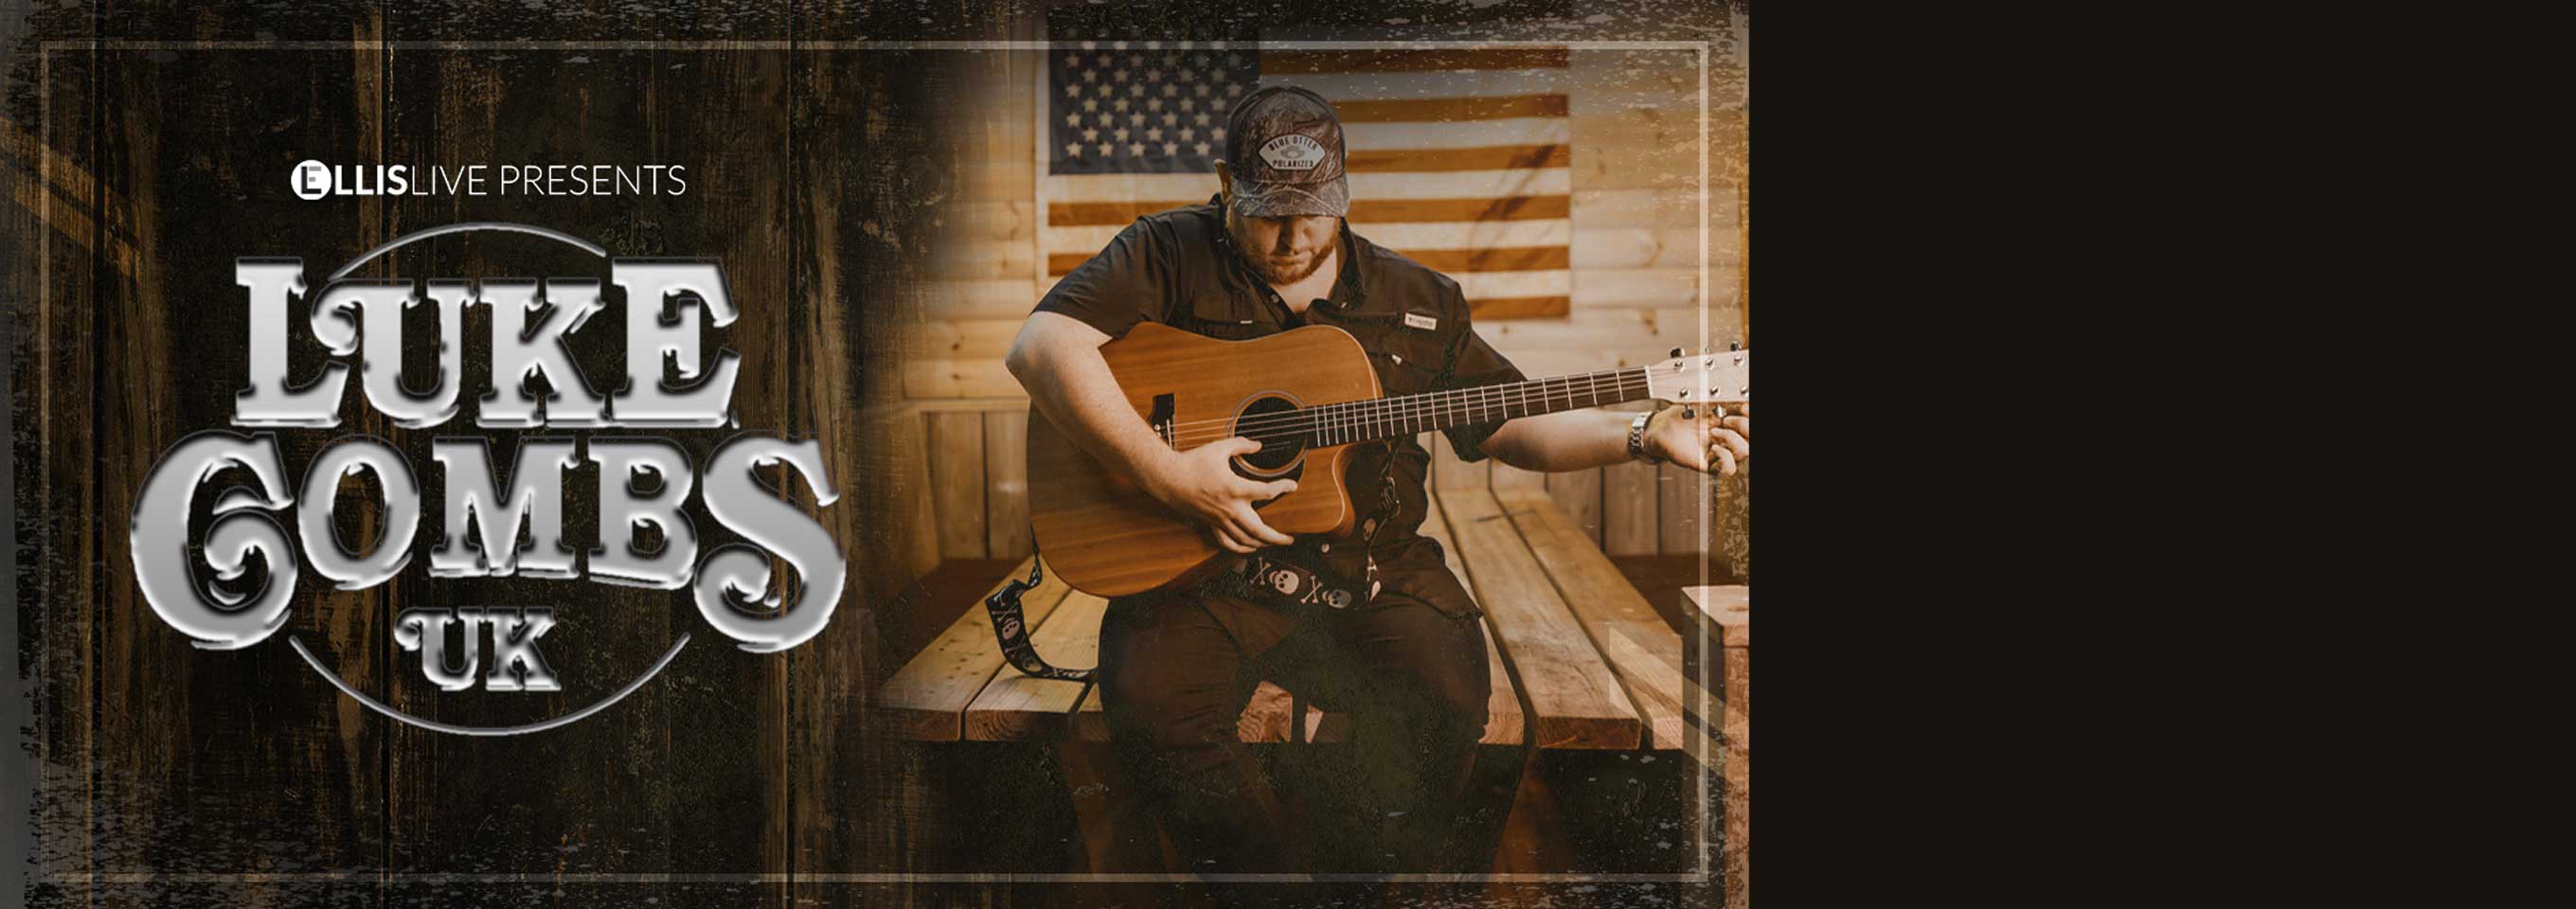 Luke Combs UK: A Tribute to the Country Megastar hero image